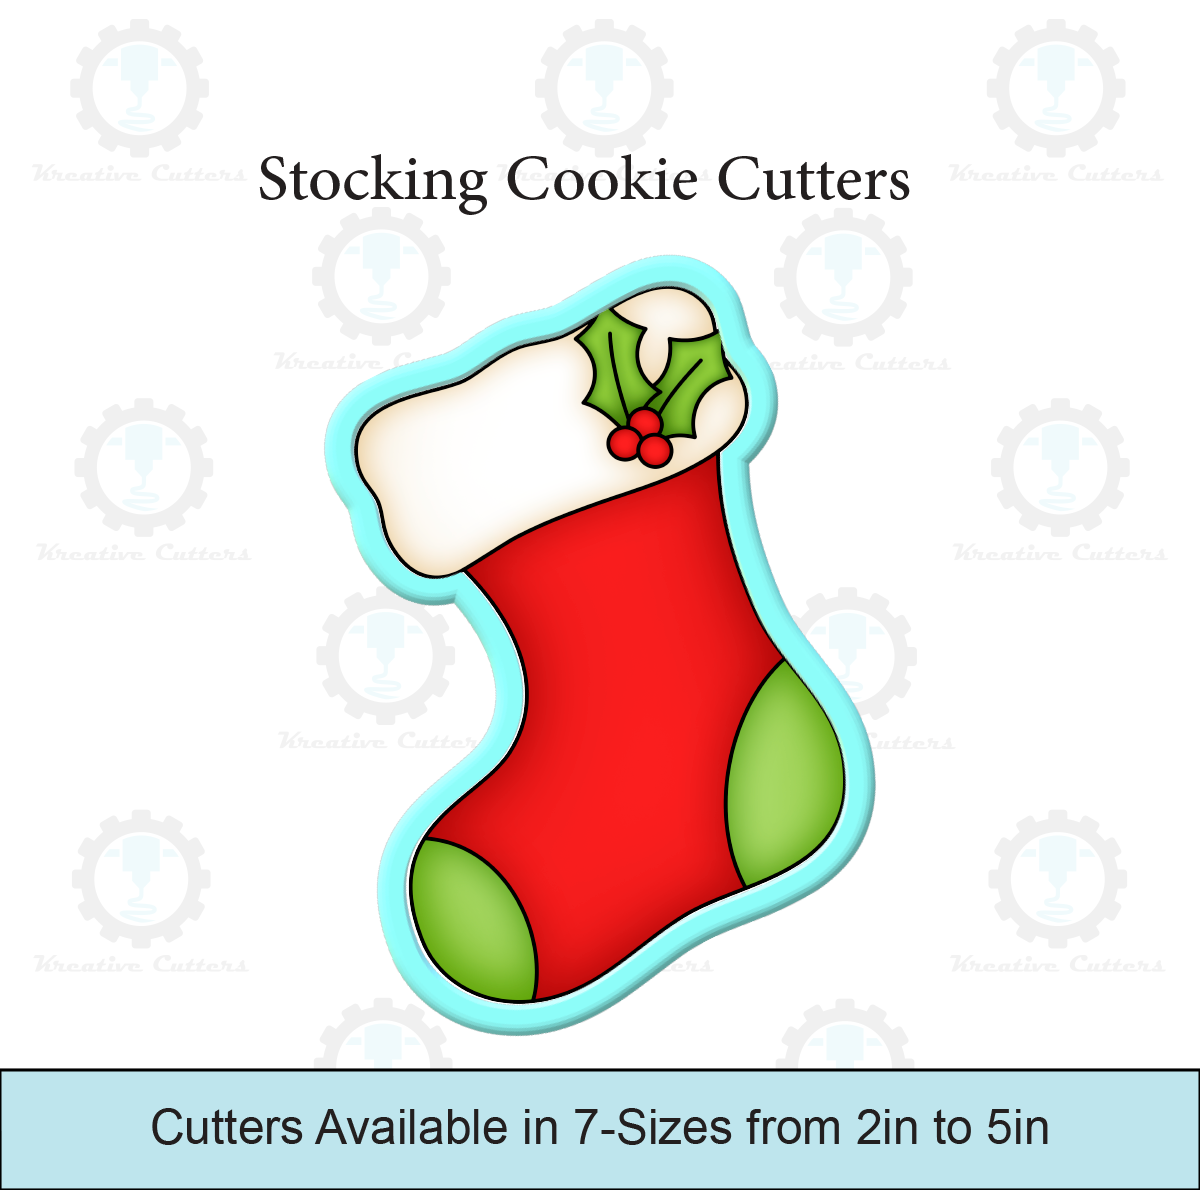 Christmas Stocking Cookie Cutters